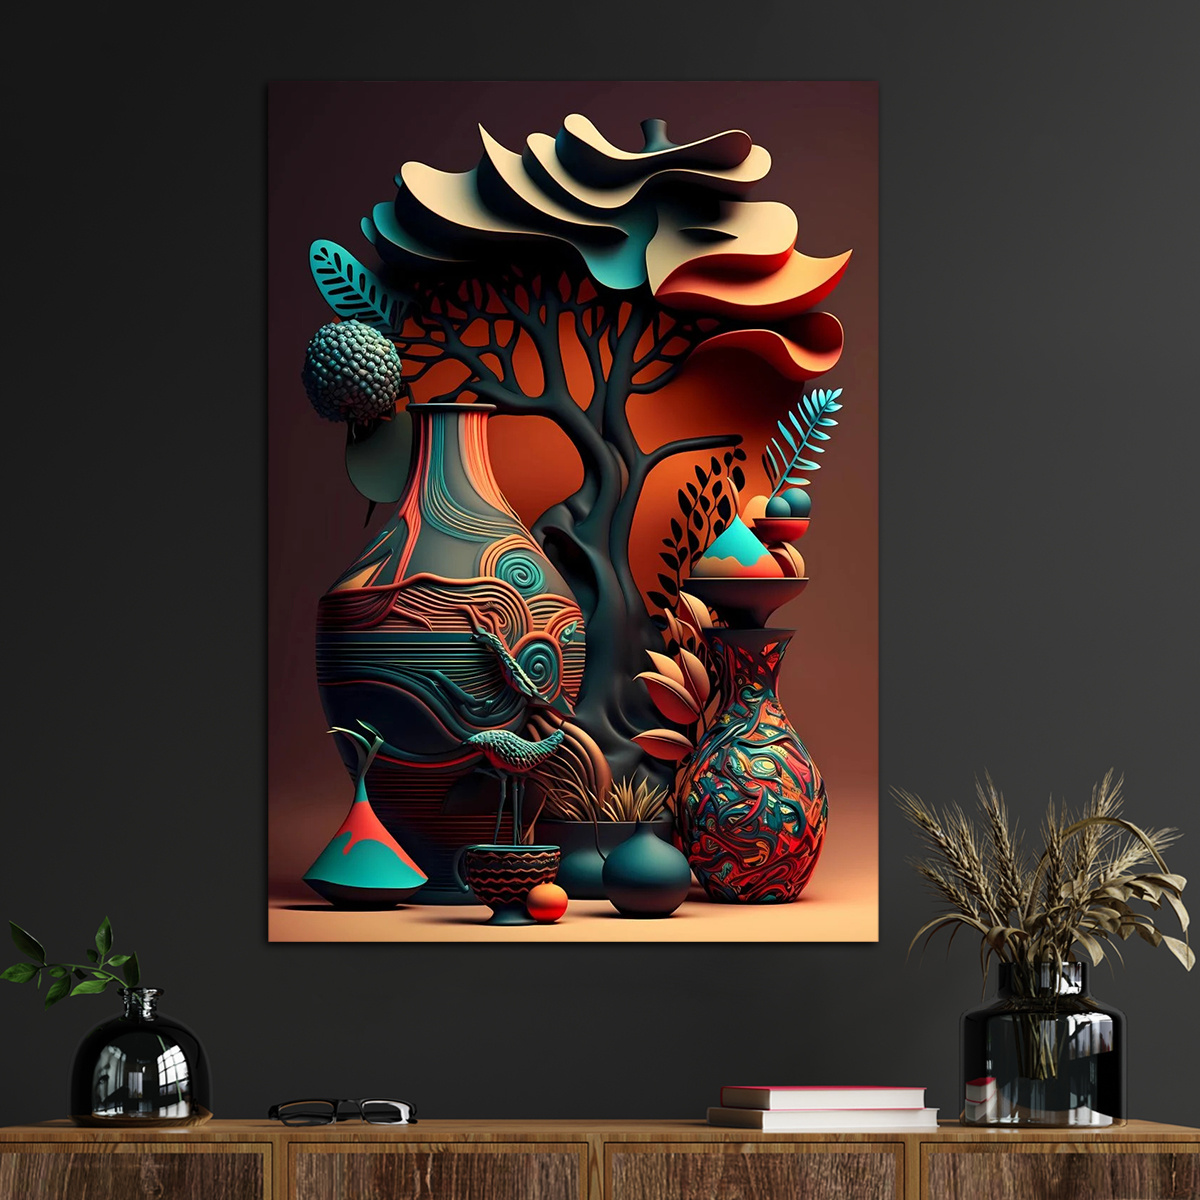 

1pc African Art Poster Canvas Wall Art For Home Decor, Abstract 3d Effect Poster Wall Decor High Quality Canvas Prints For Living Room Bedroom Kitchen Office Cafe Decor, Perfect Gift And Decoration